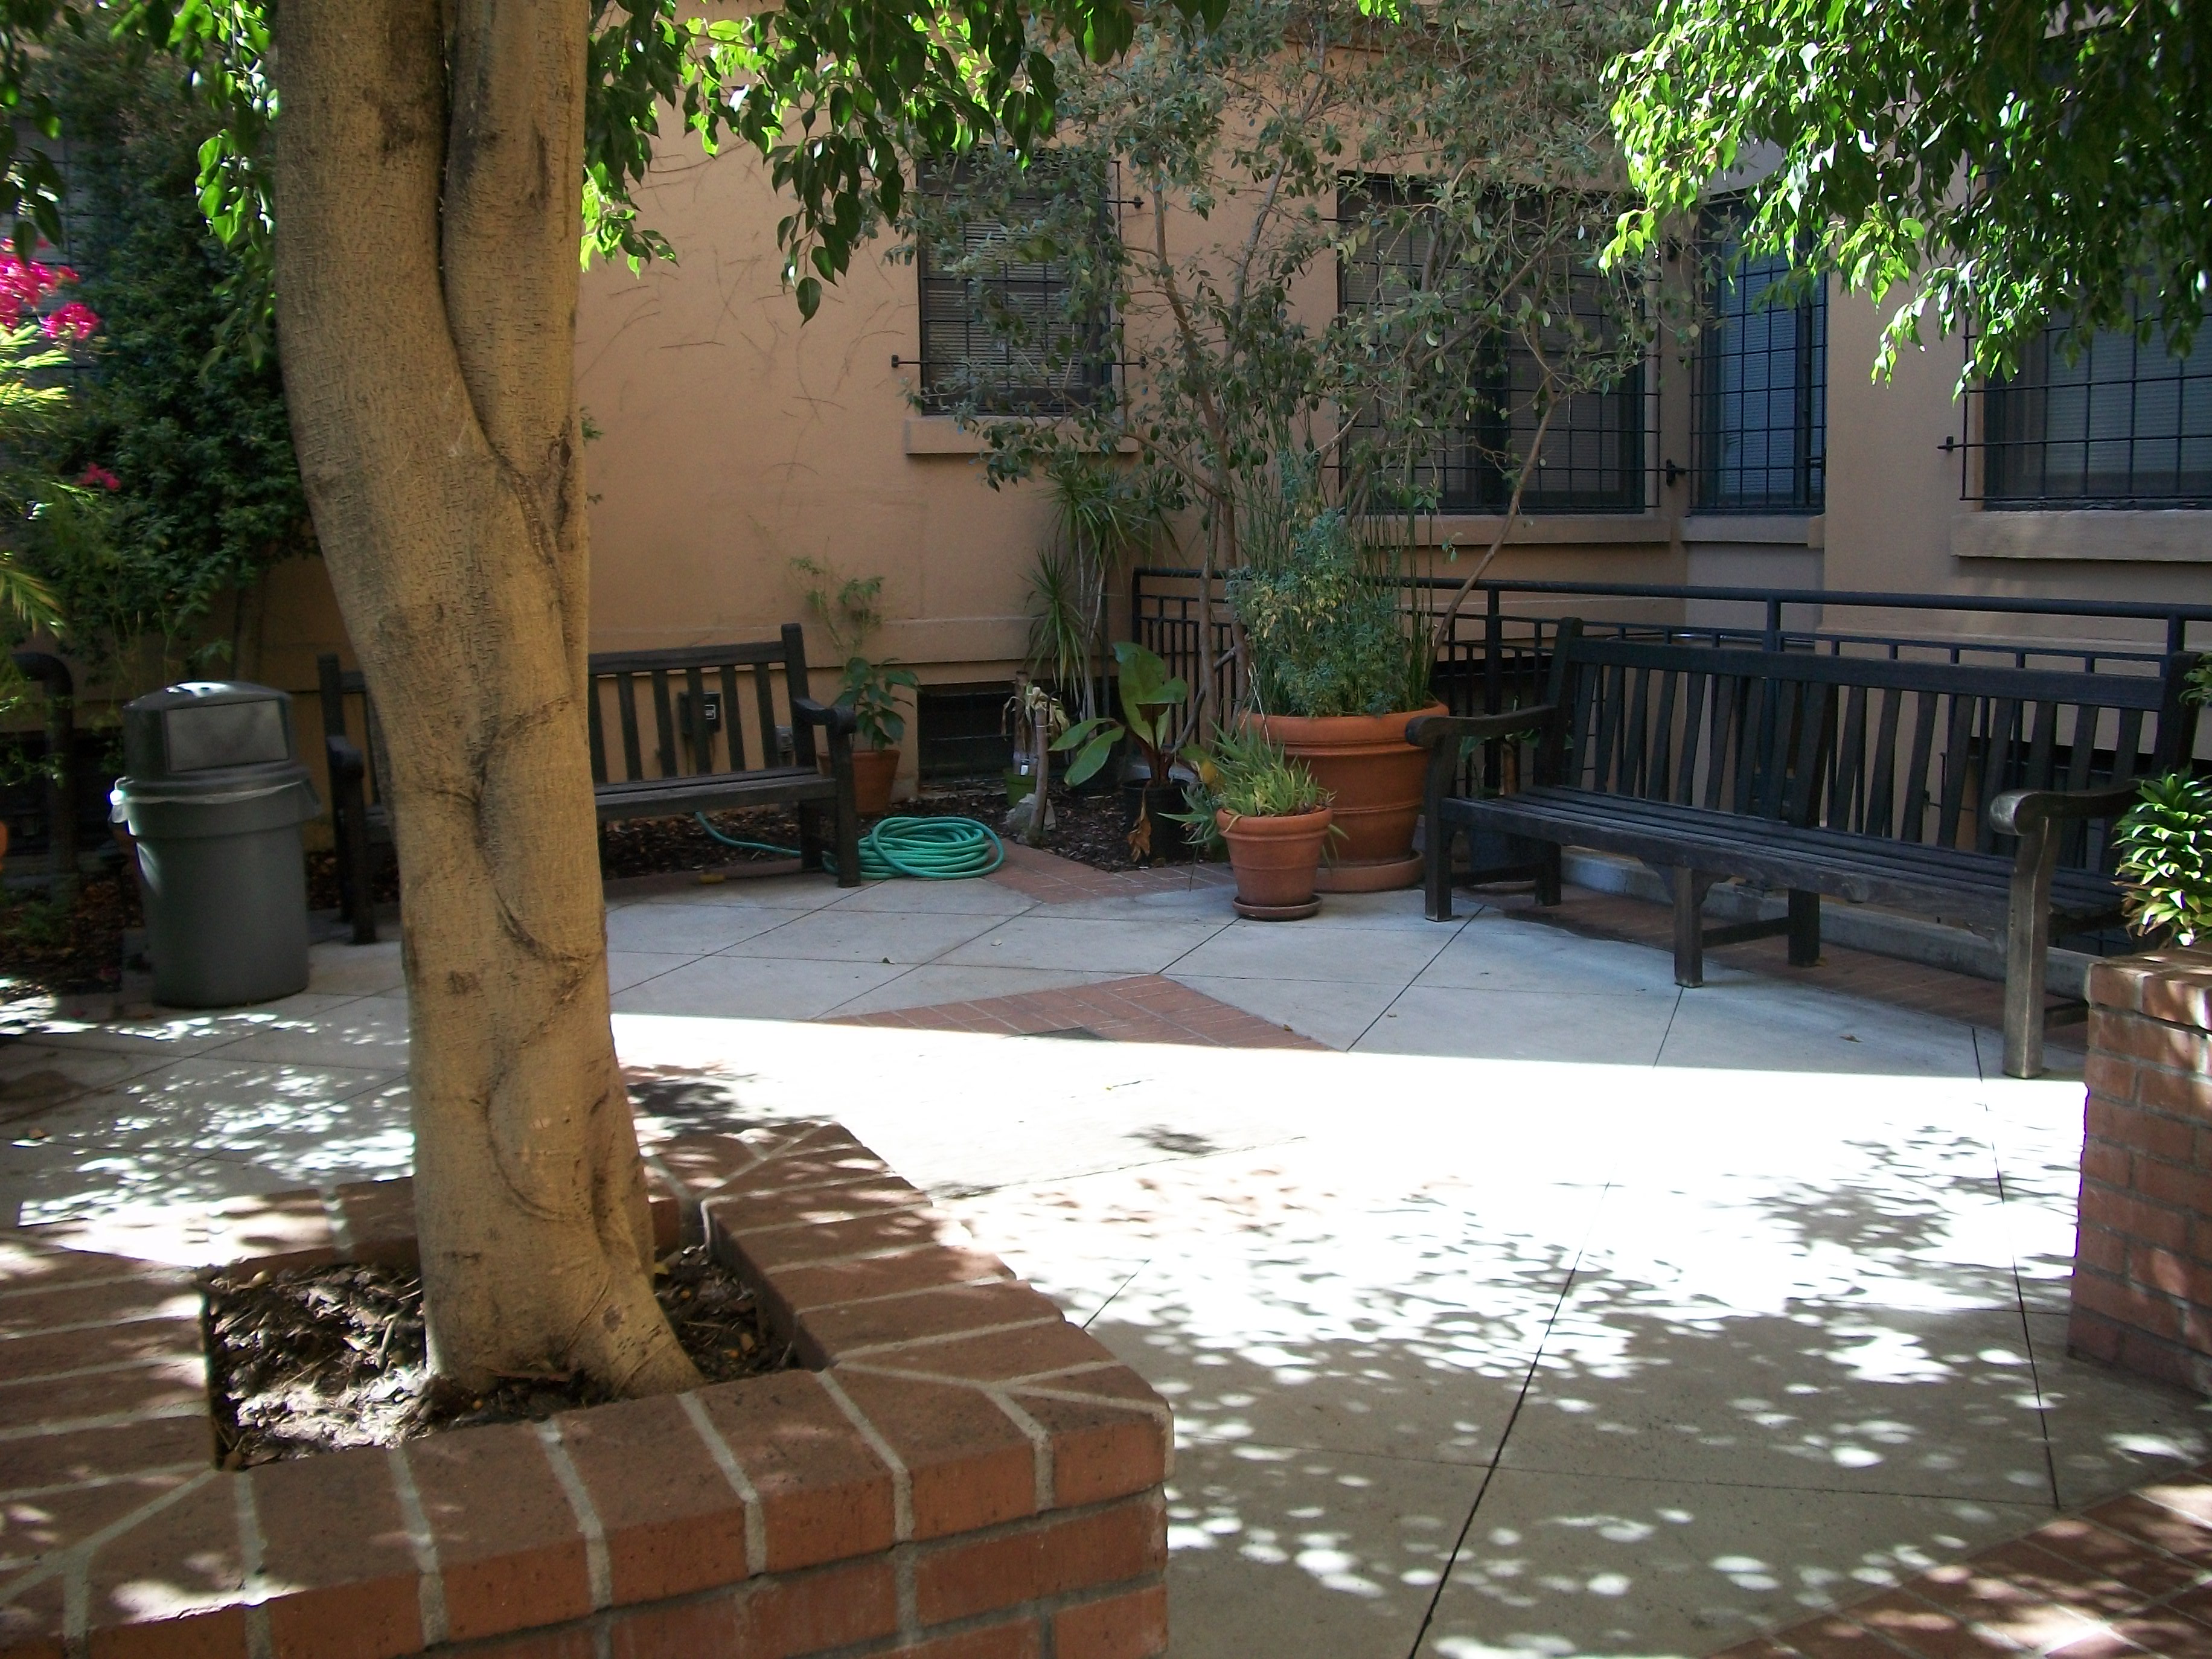 Exterior corner view of the courtyard at the Young Apartments. Large tree with benches along the wall and railings with potted plants